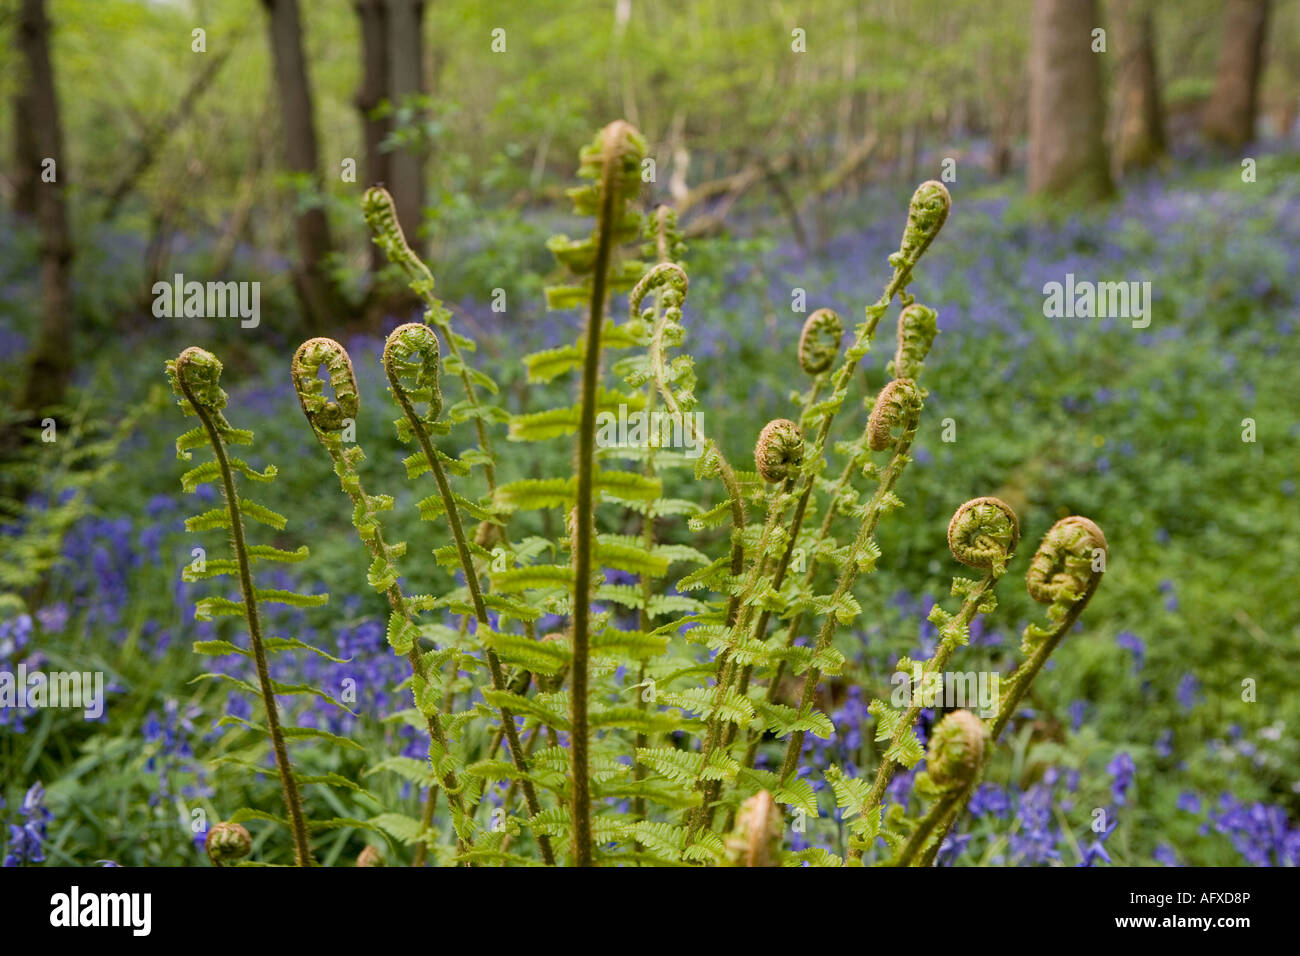 Ferns shot against a backdrop of bluebells Stock Photo